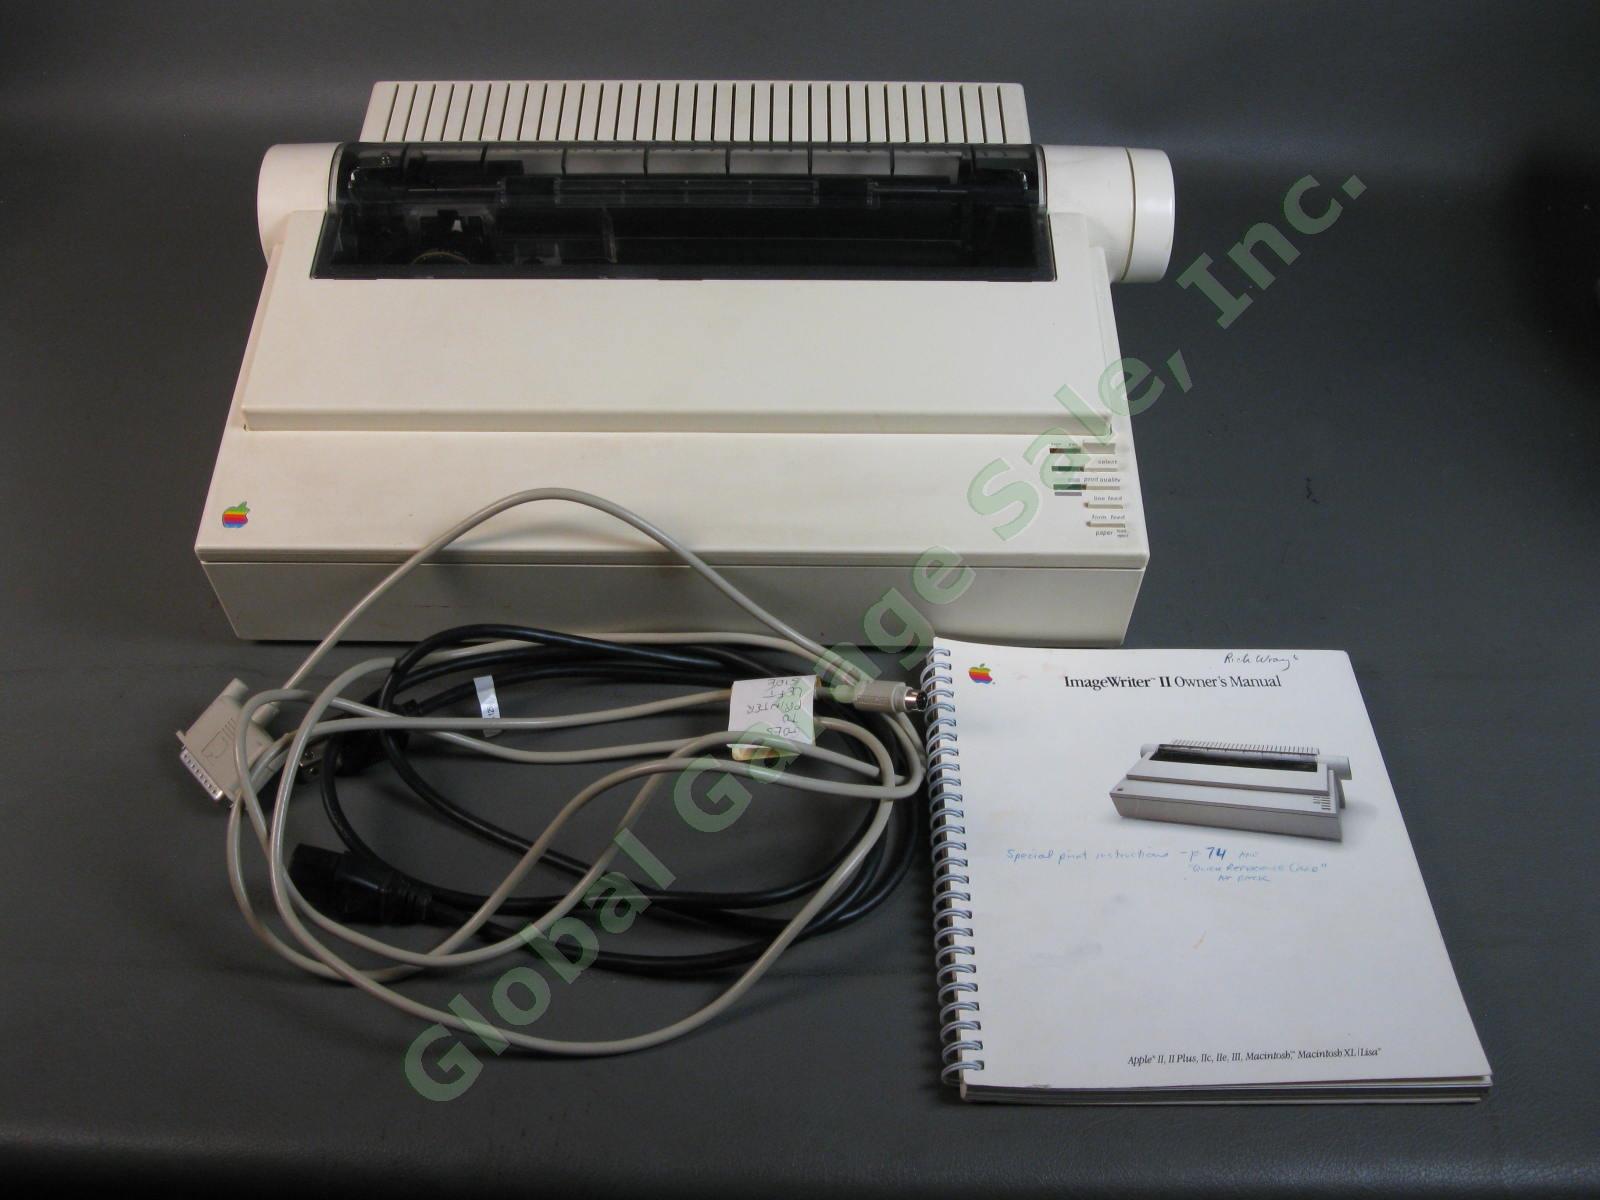 VTG Apple ImageWriter II Printer Manual Excellent Condition WORKING Needs Ribbon